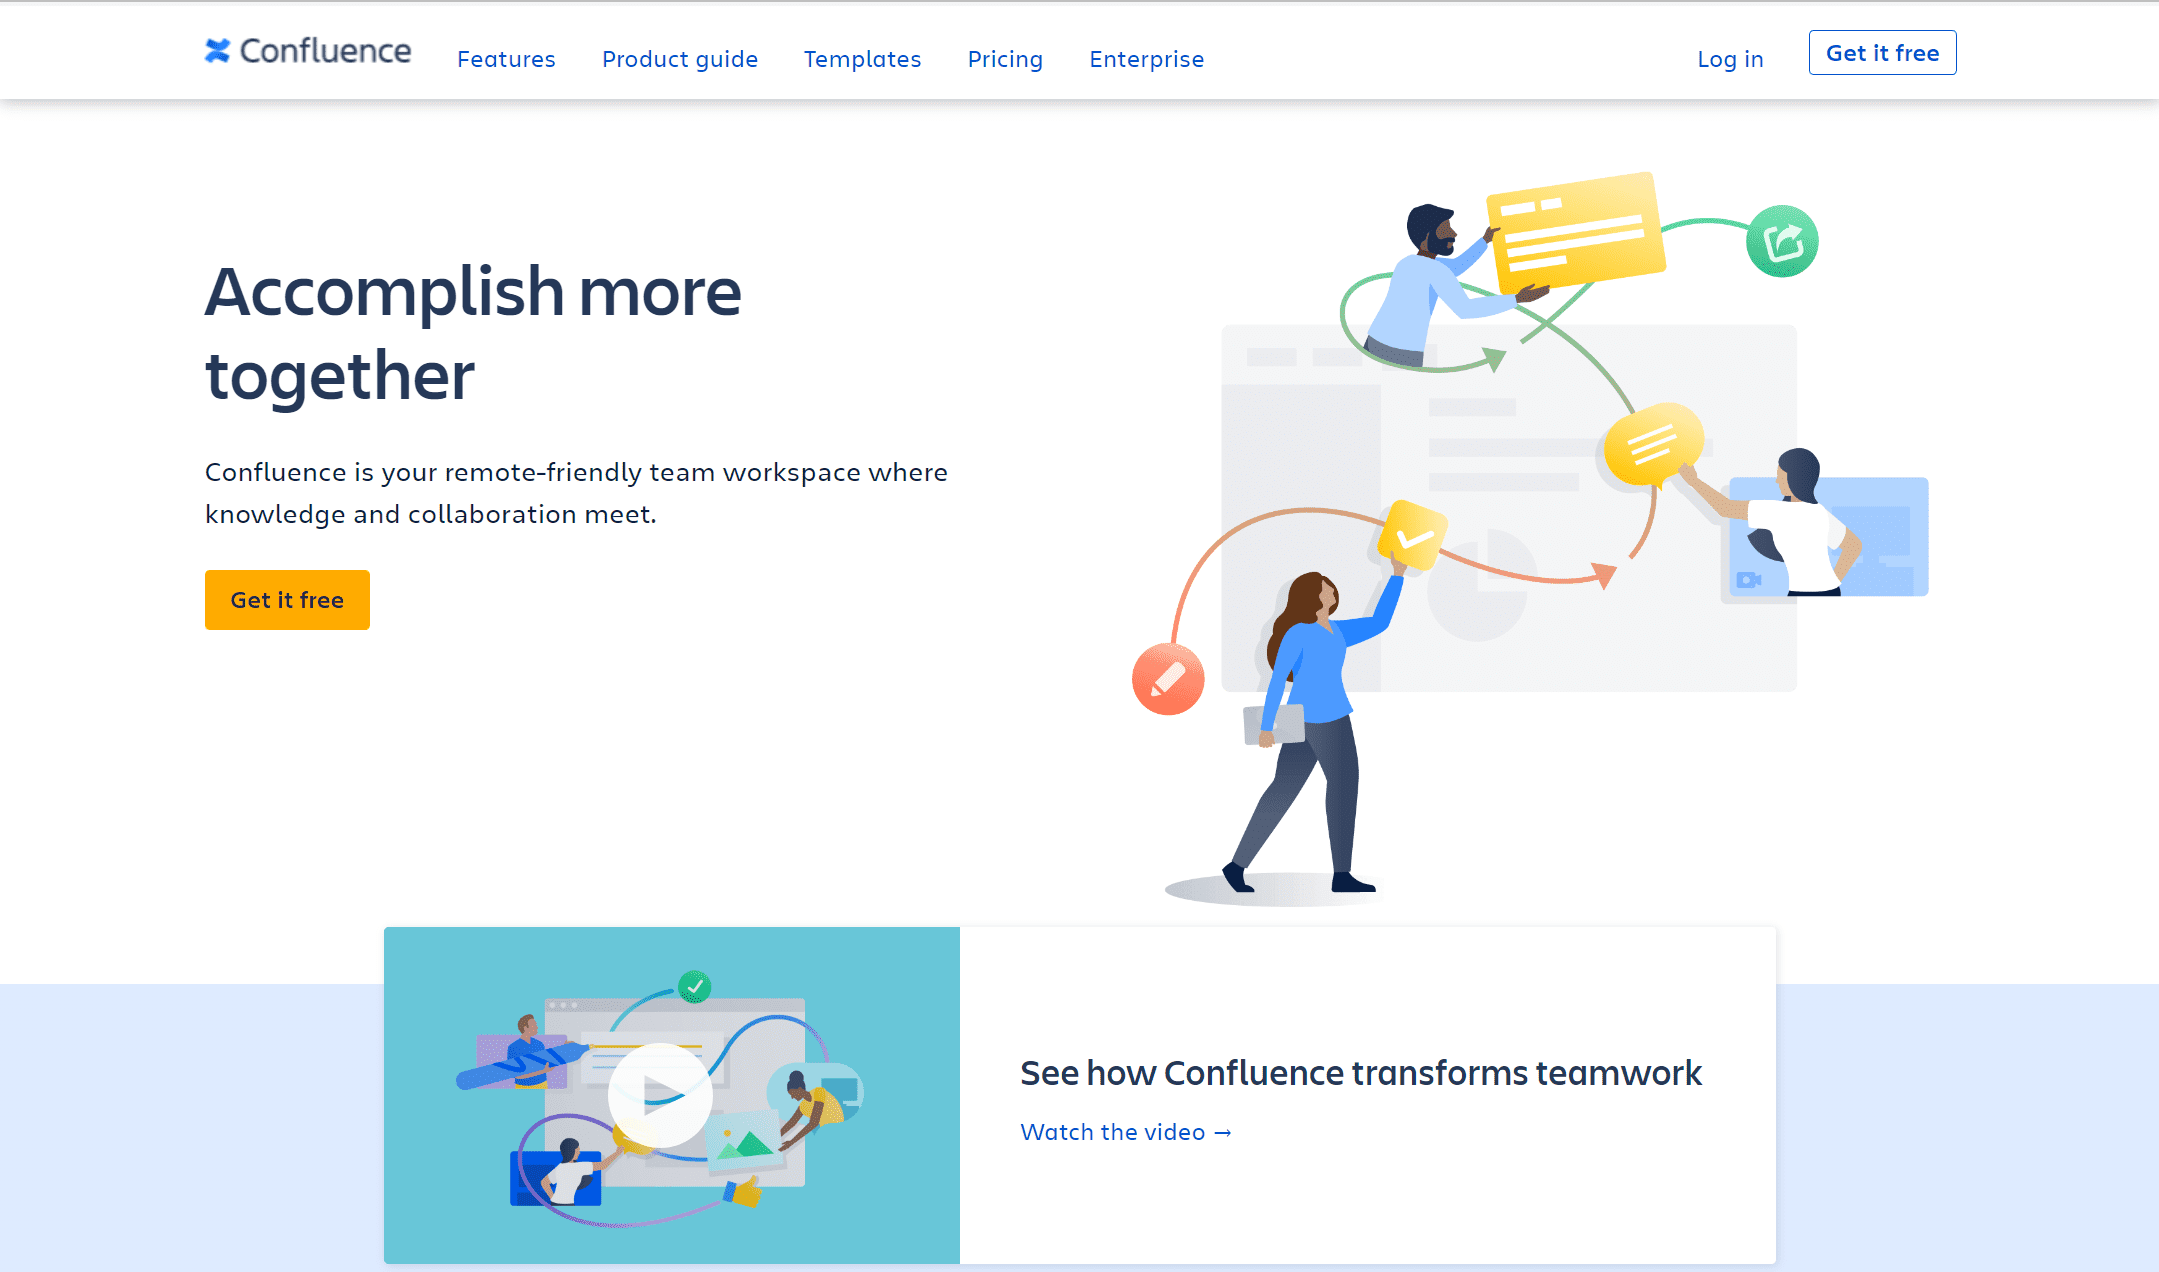 The homepage for Confluence.